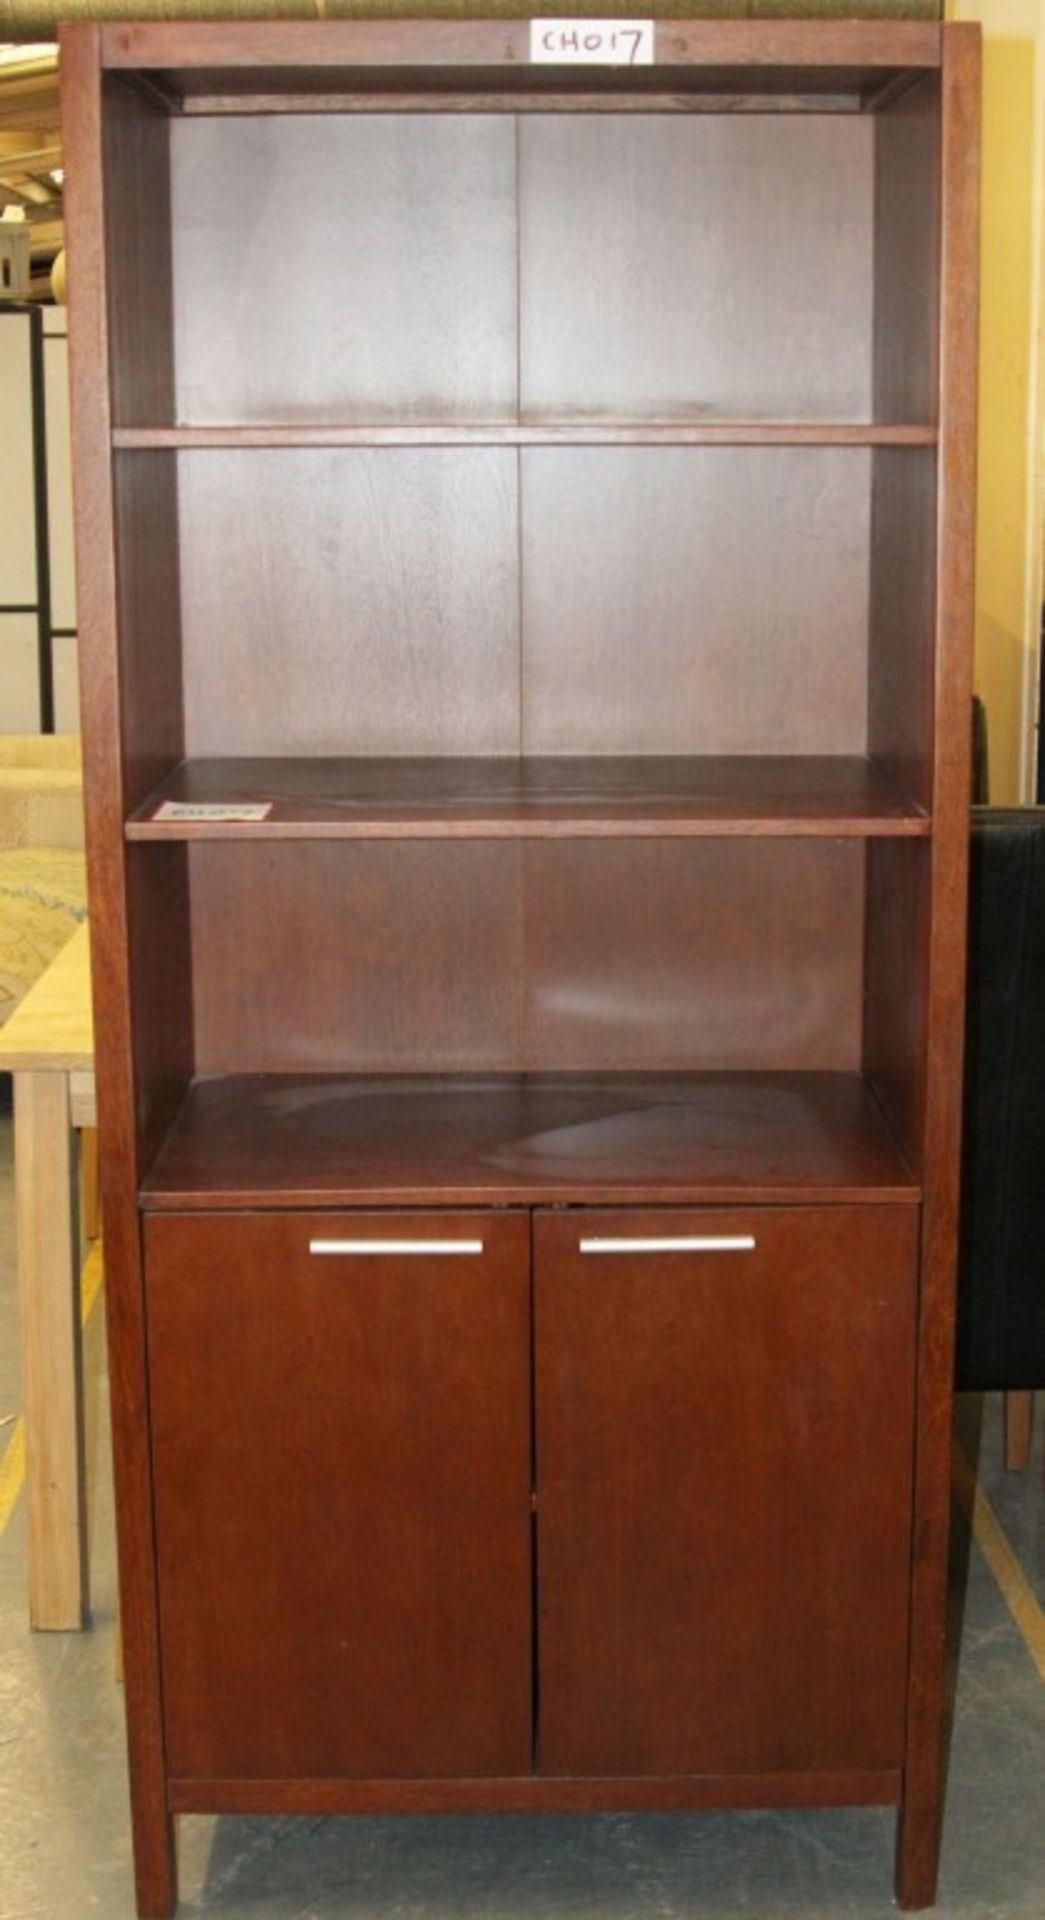 1 x Mahogany 3ft Tall 2 Door / 2 Shelf Unit With Glass Shelves – Ref CH017 – Ex Display Stock In - Image 3 of 3